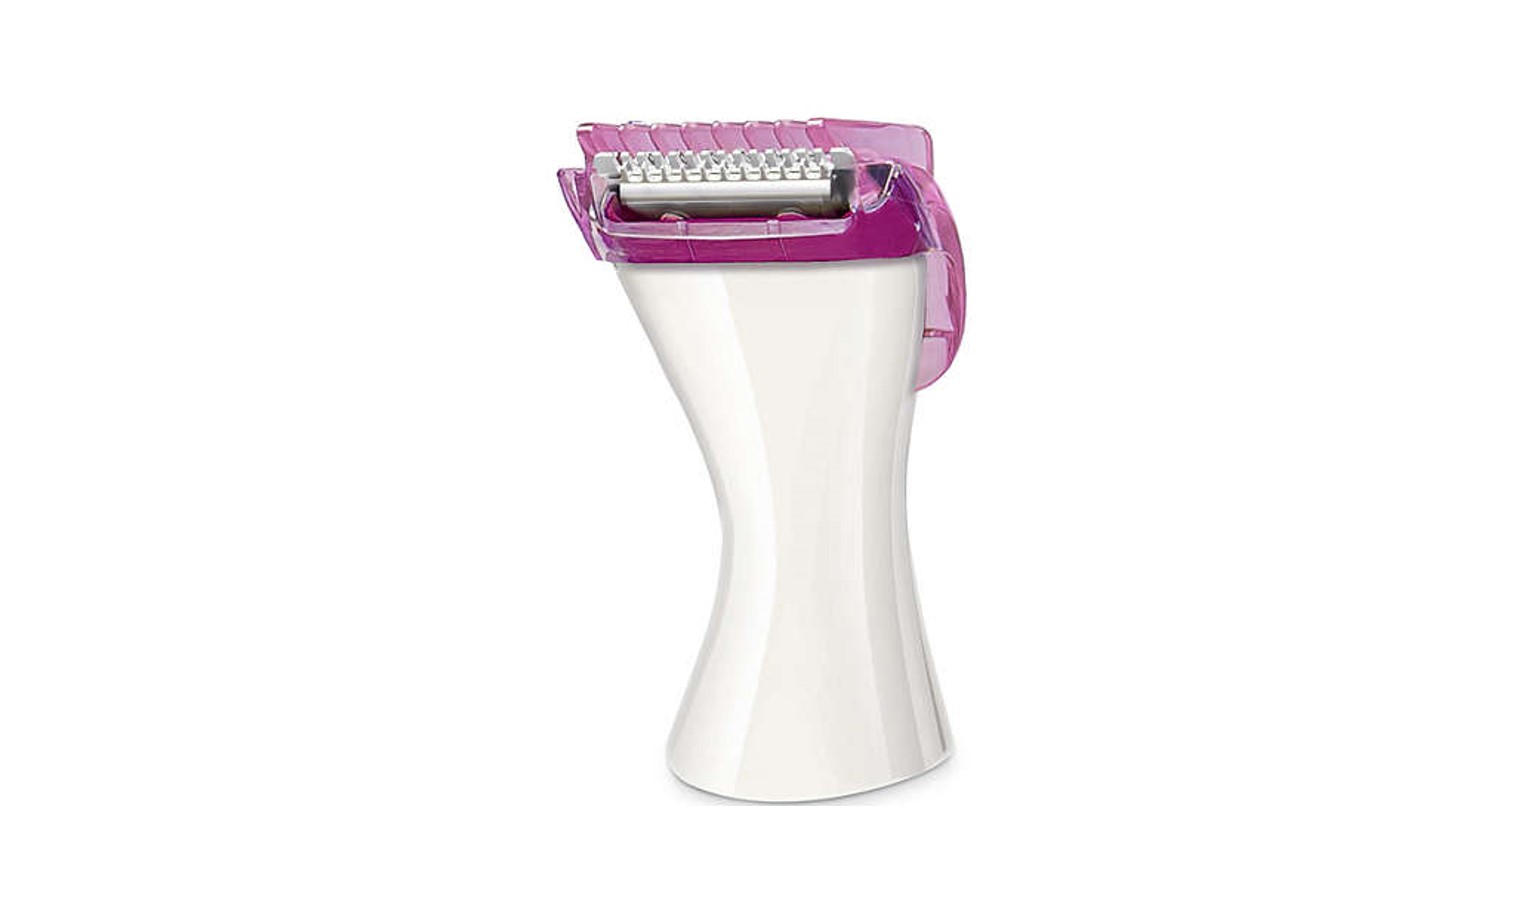 philips pink trimmer